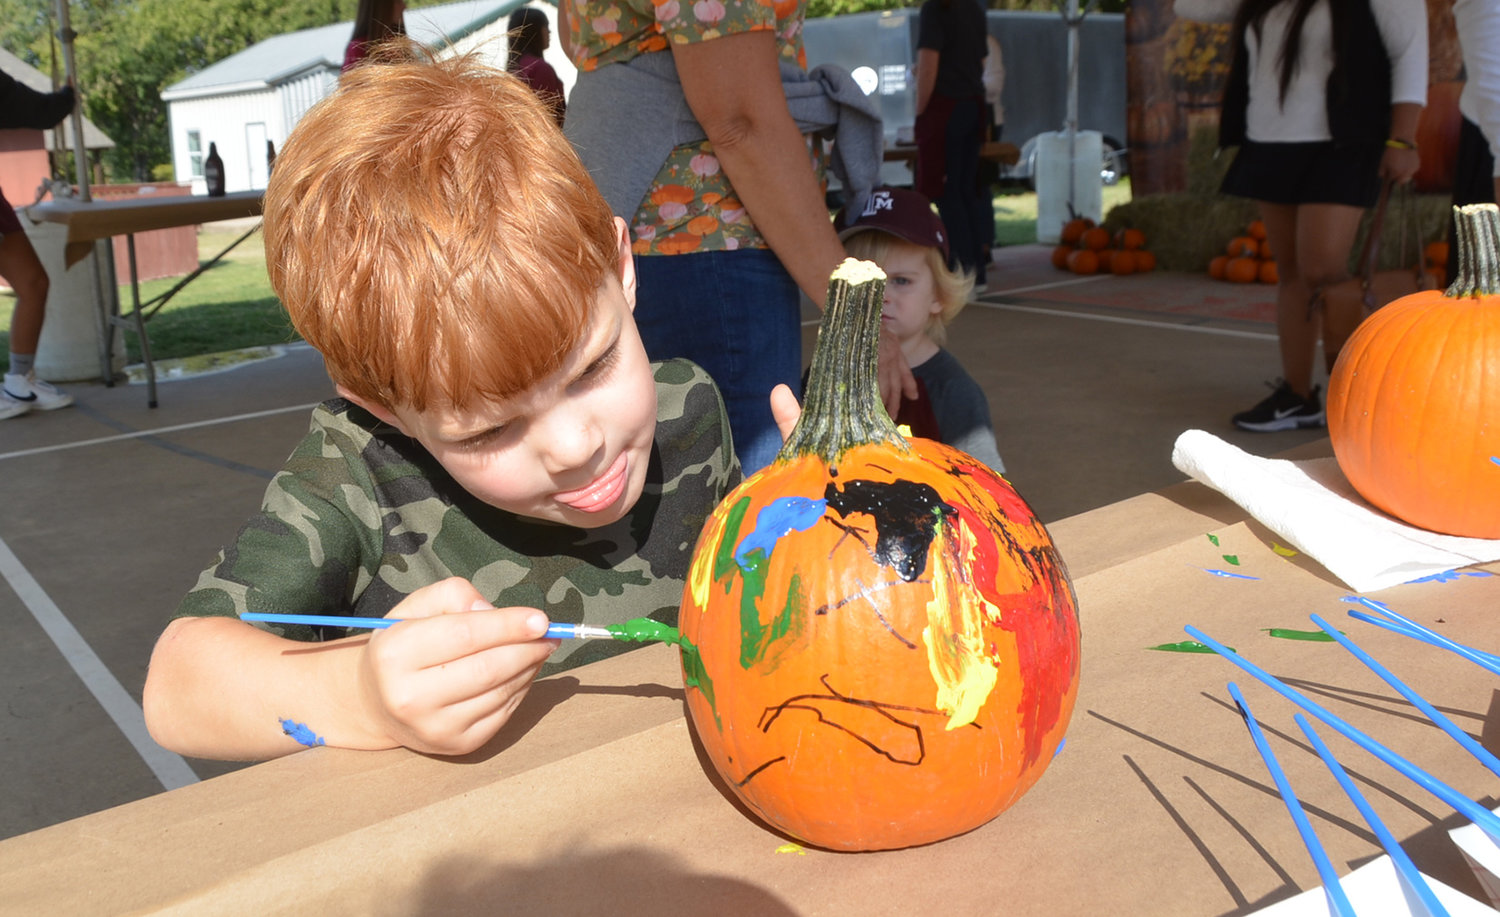 Four-year-old Wyatt Hamende puts the finish touches on a pumpkin masterpiece.